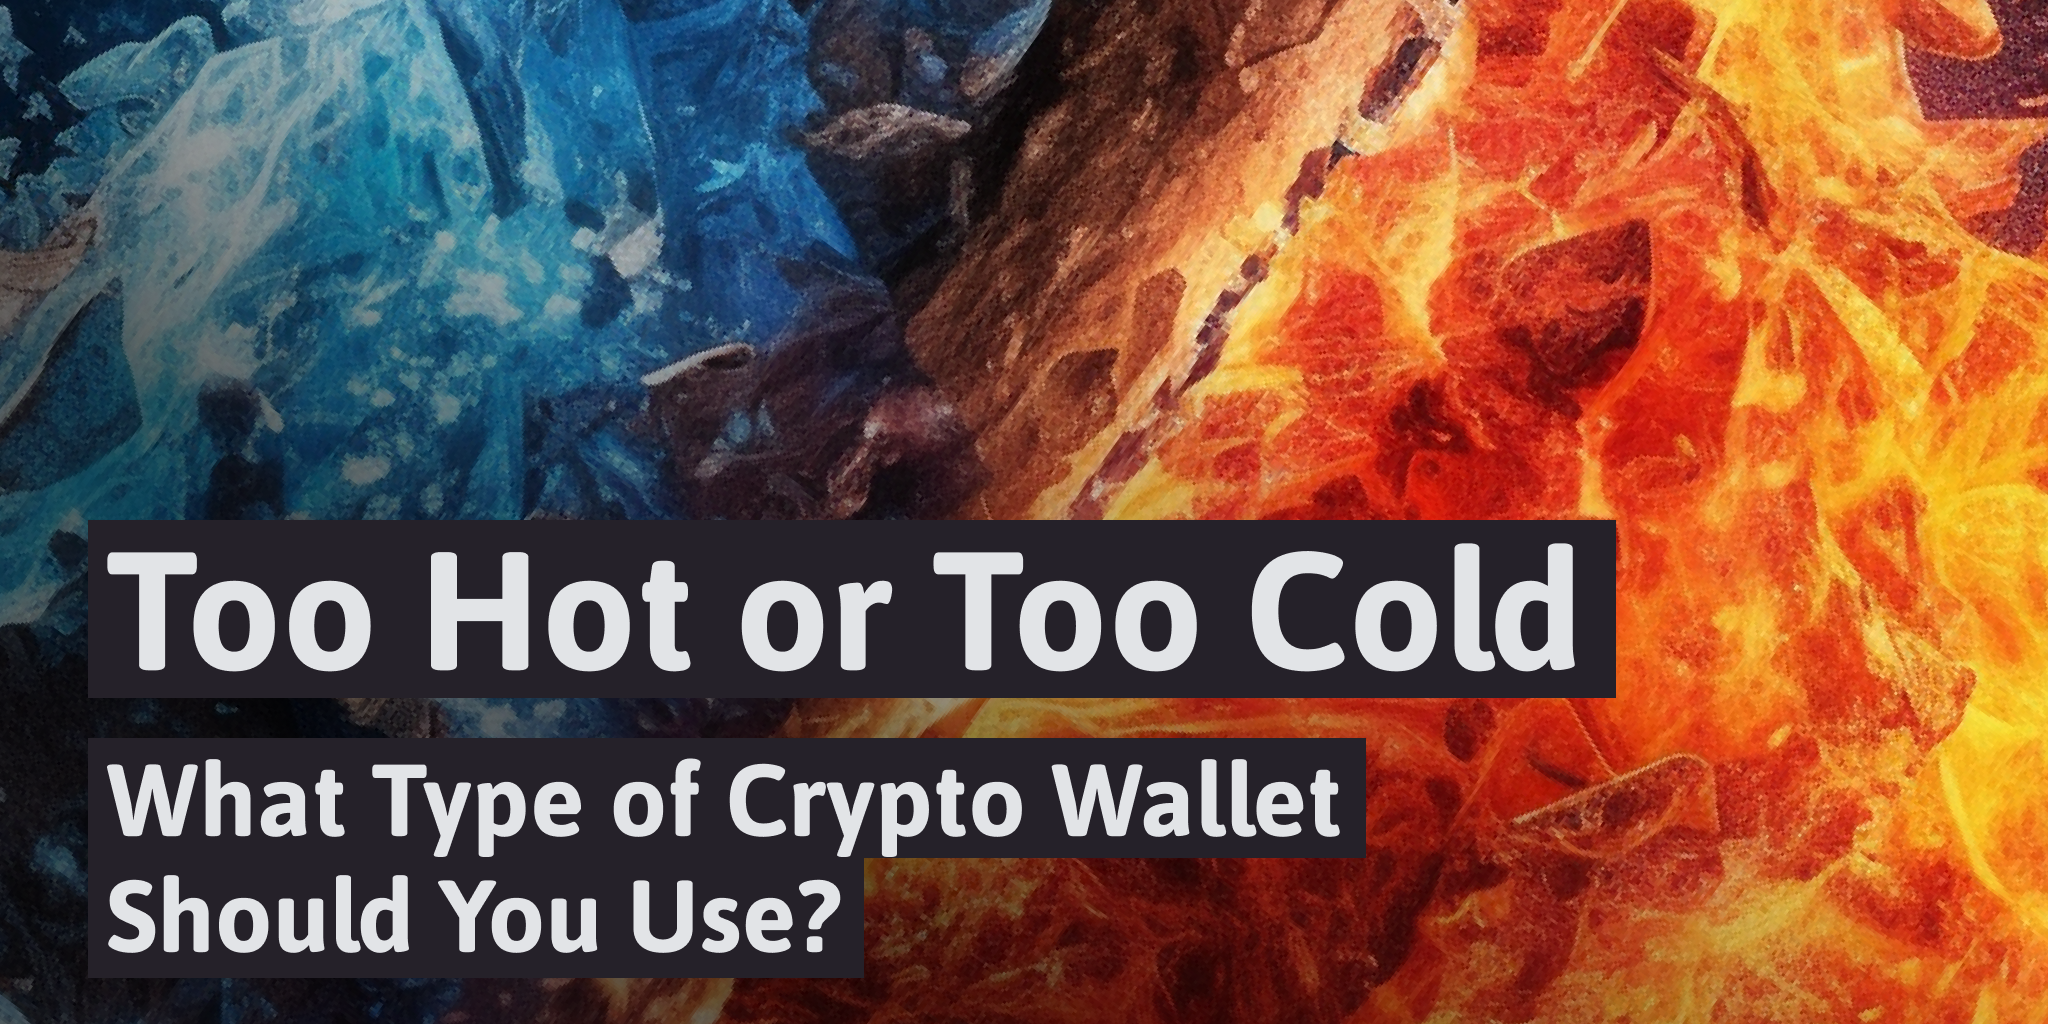 Too Hot or Too Cold: What Type of Crypto Wallet Should You Use?